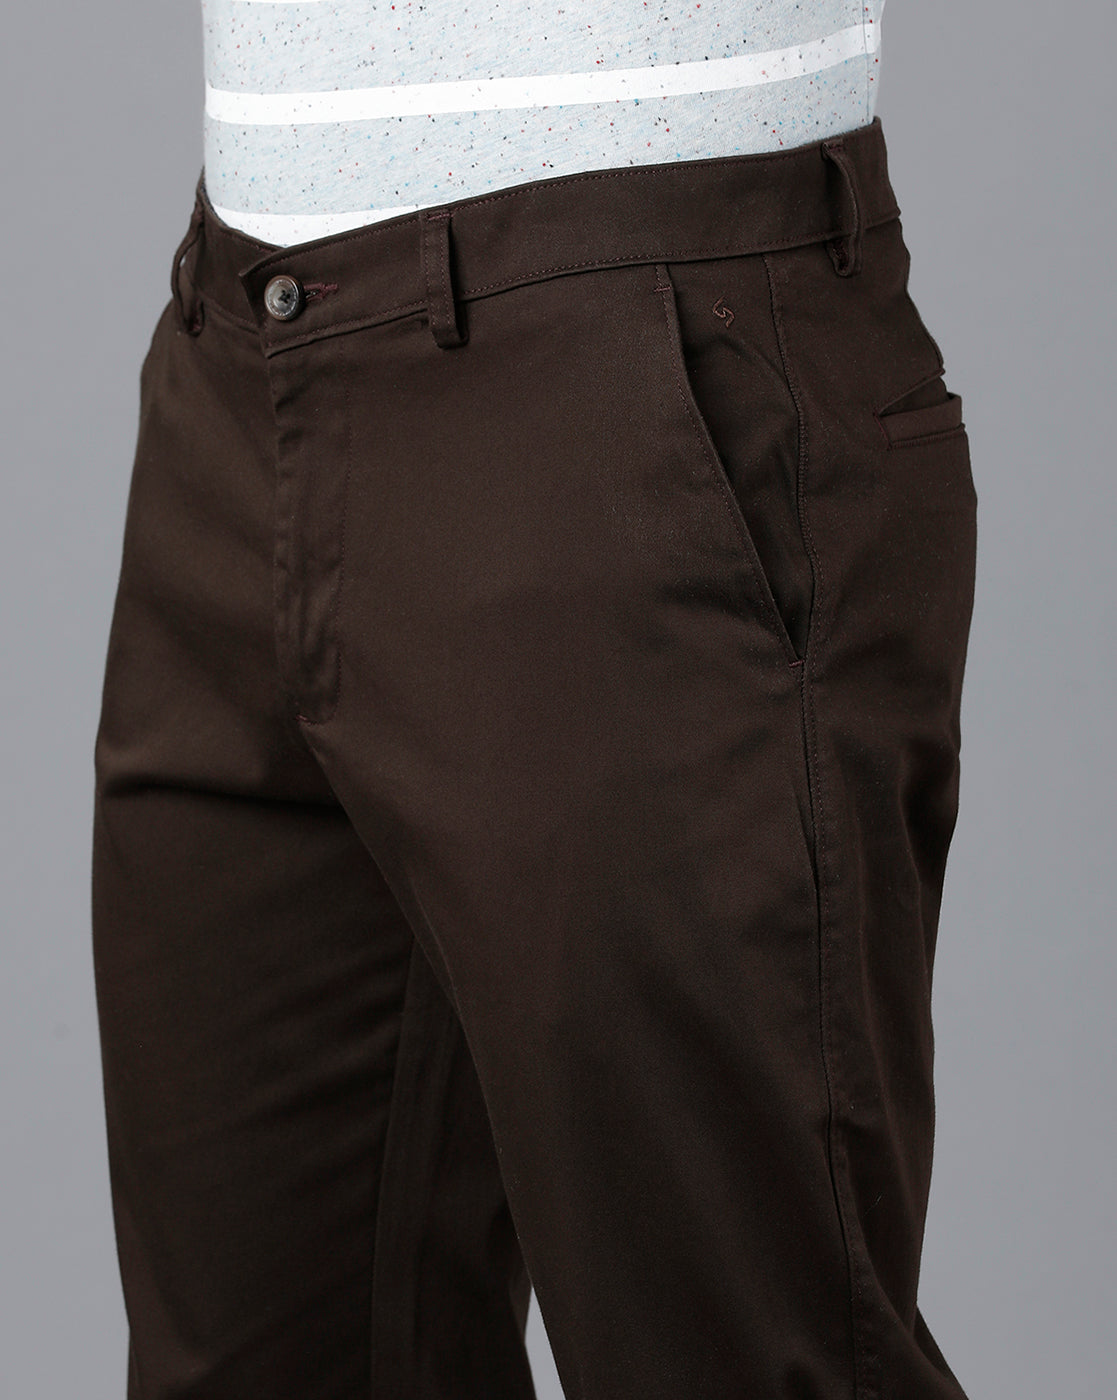 Buy Maroon and Brown Combo of 2 Women Trouser Cotton Flax Pants for Best  Price Reviews Free Shipping